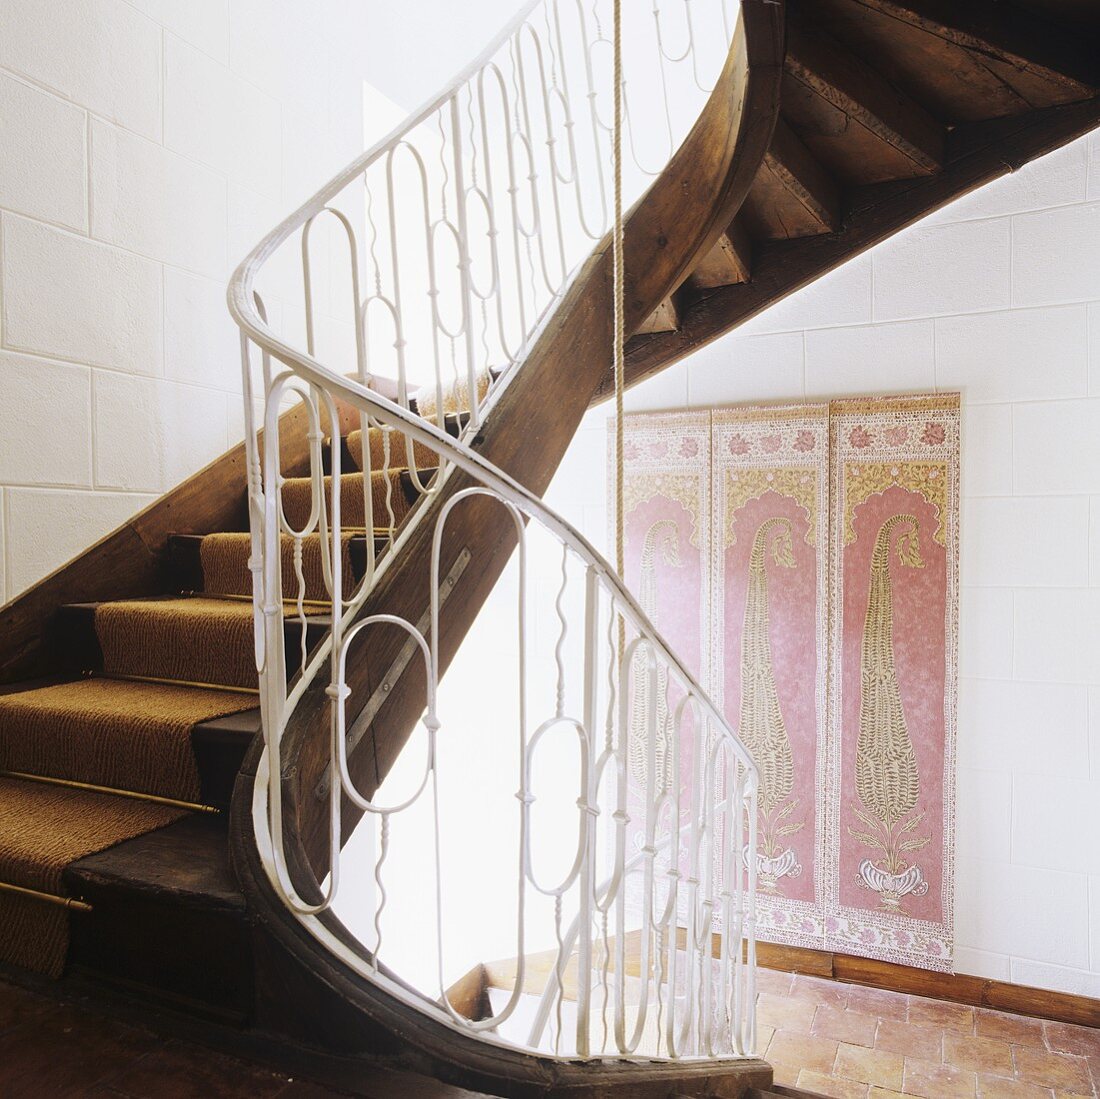 A curved wooden stairway with a white metal banister